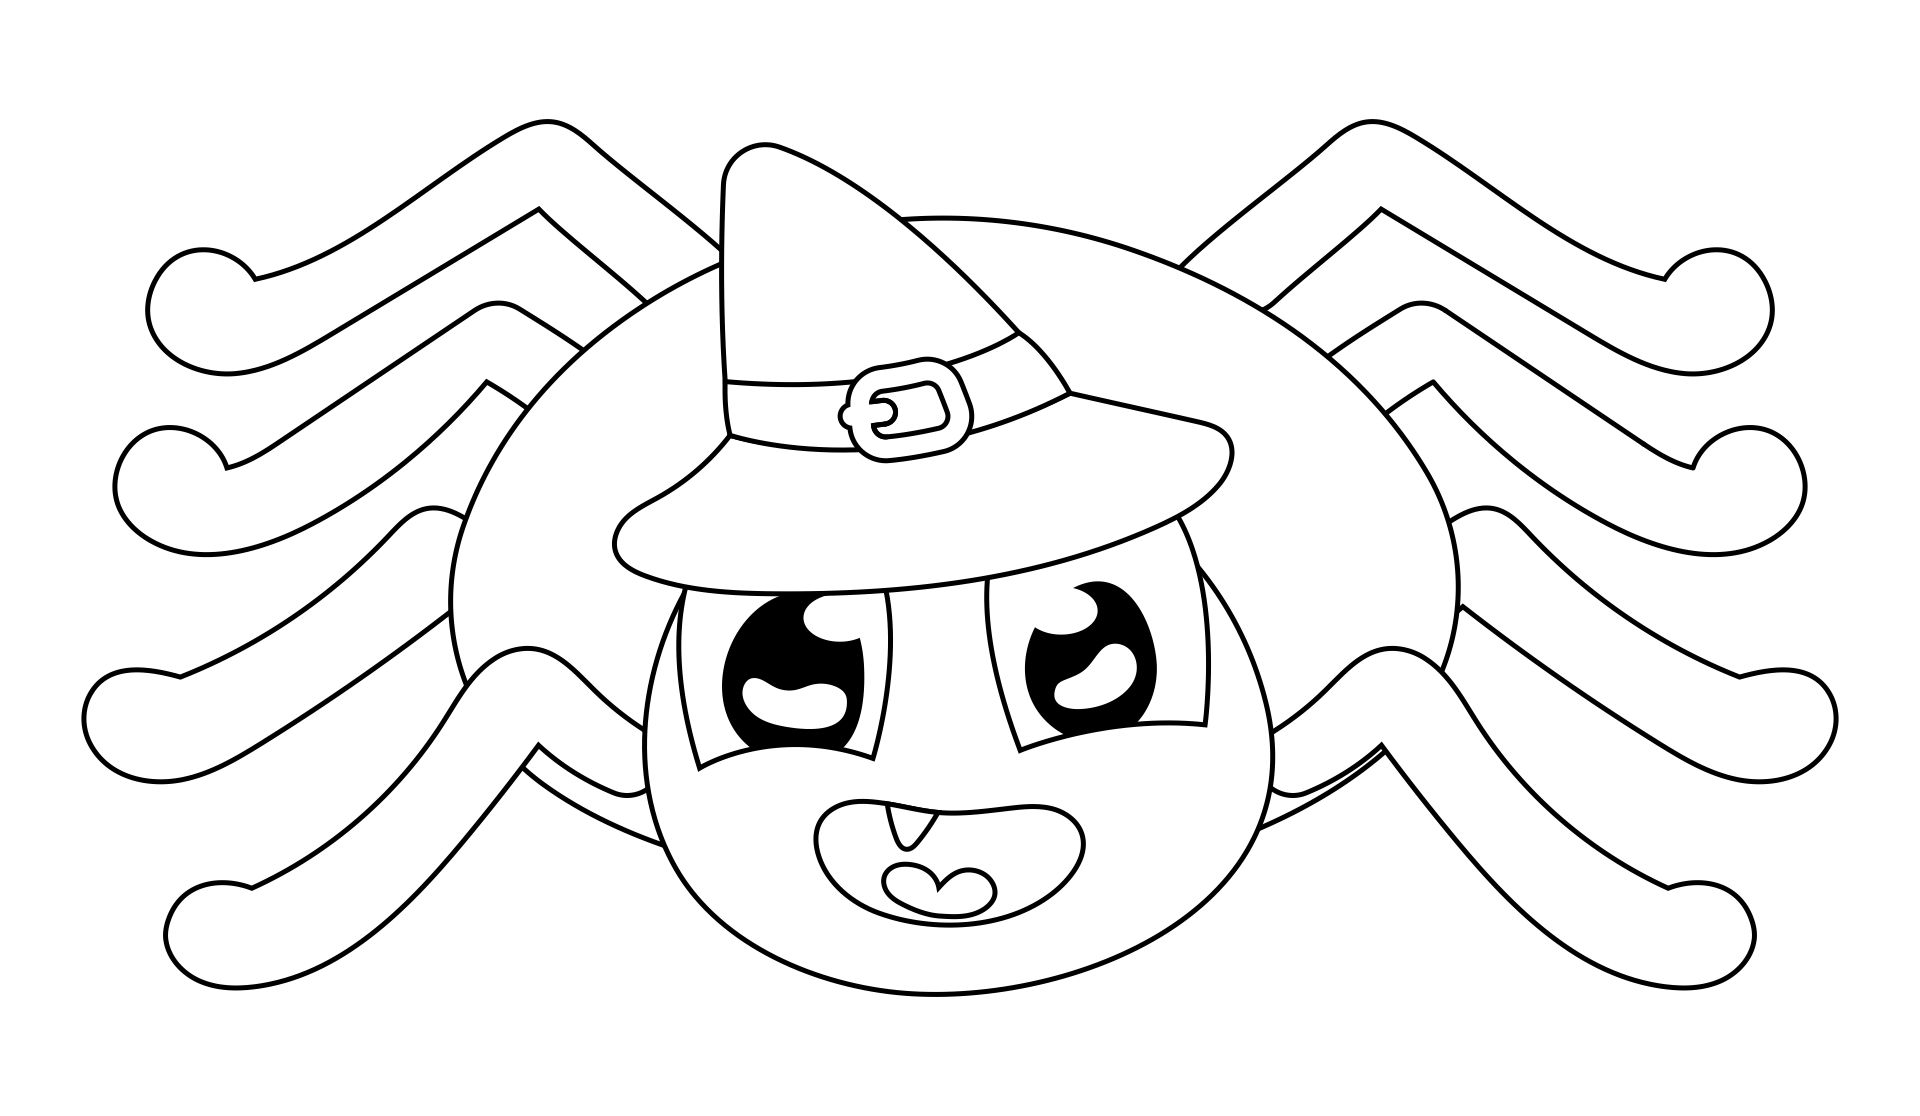 Printable Halloween Craft Spider Coloring Page